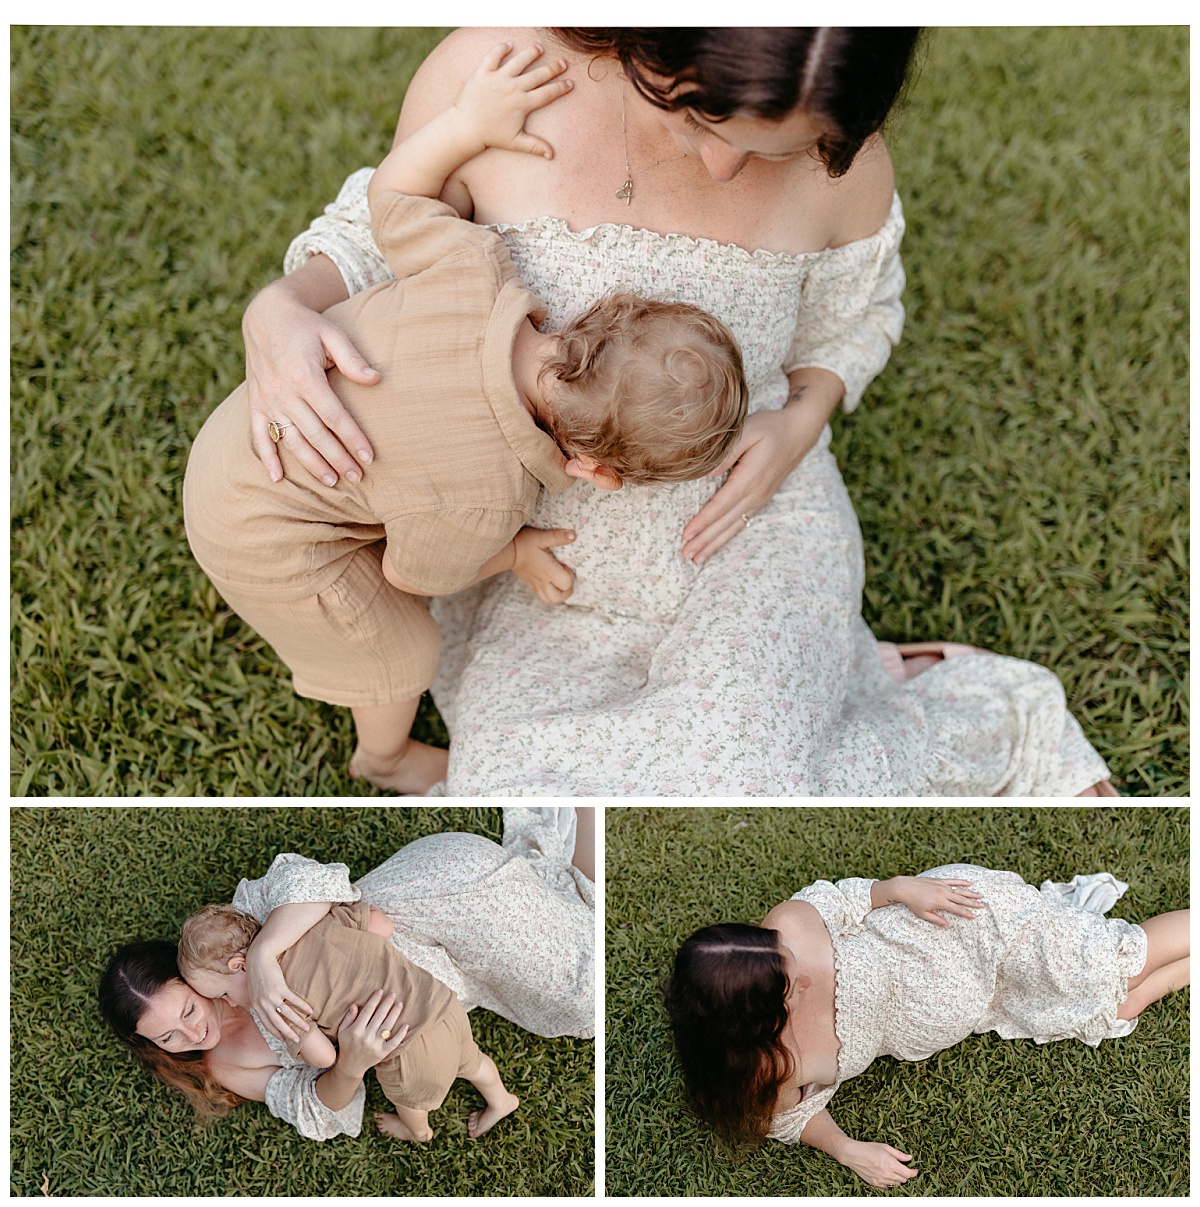 small boy kisses mom's growing pregnant belly by Nikki Meer Photography